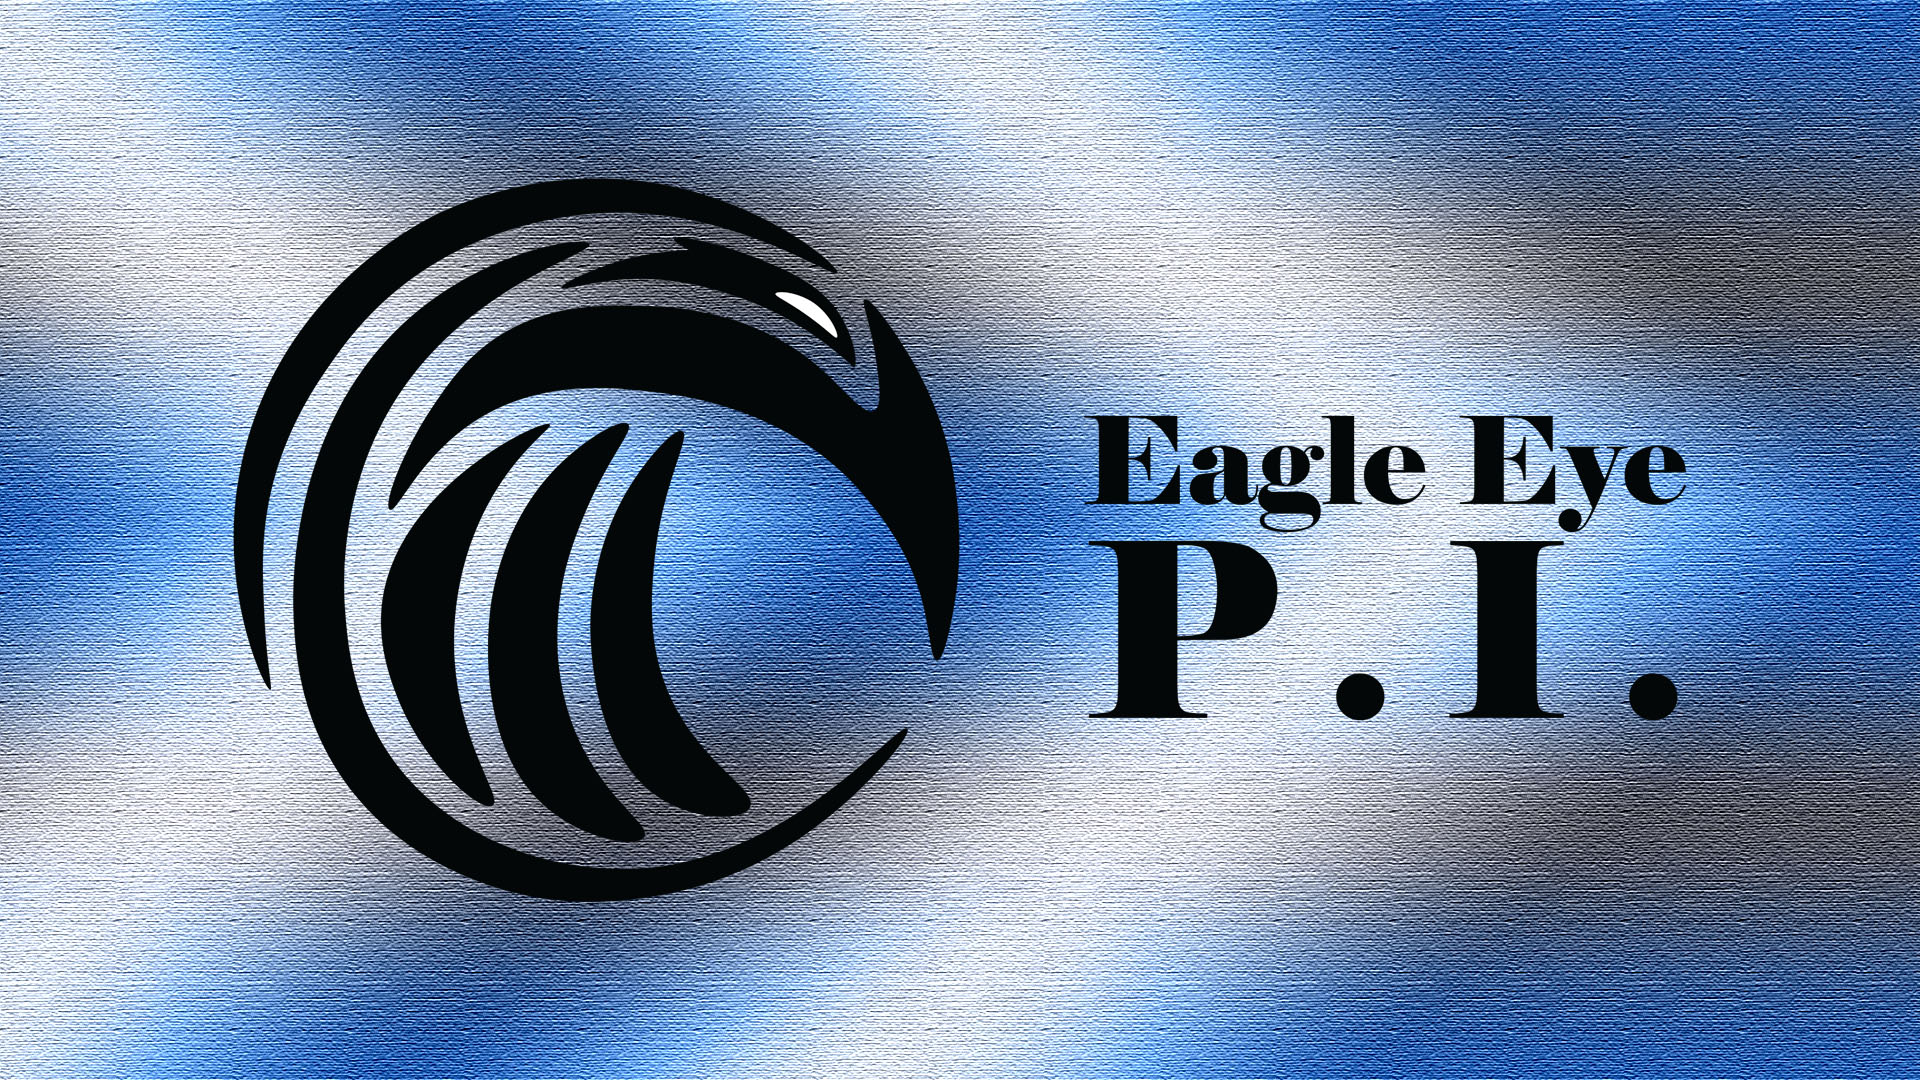 Black eagle with a blue and gray gradient textered background. Eagle eye private investigators.